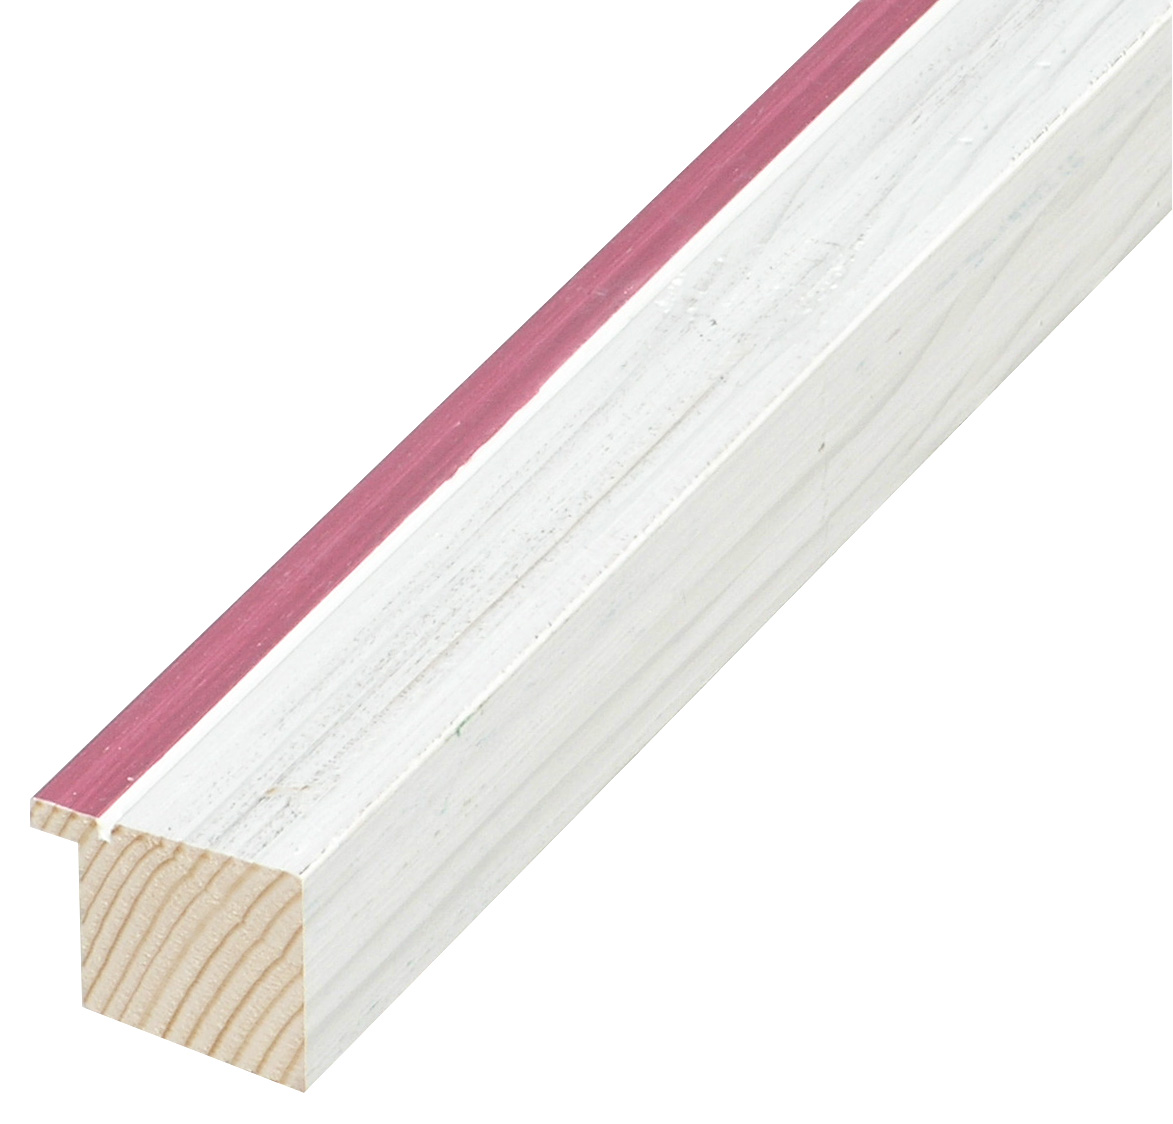 Moulding finger-jointed pine height 33mm - White, fucsia edge